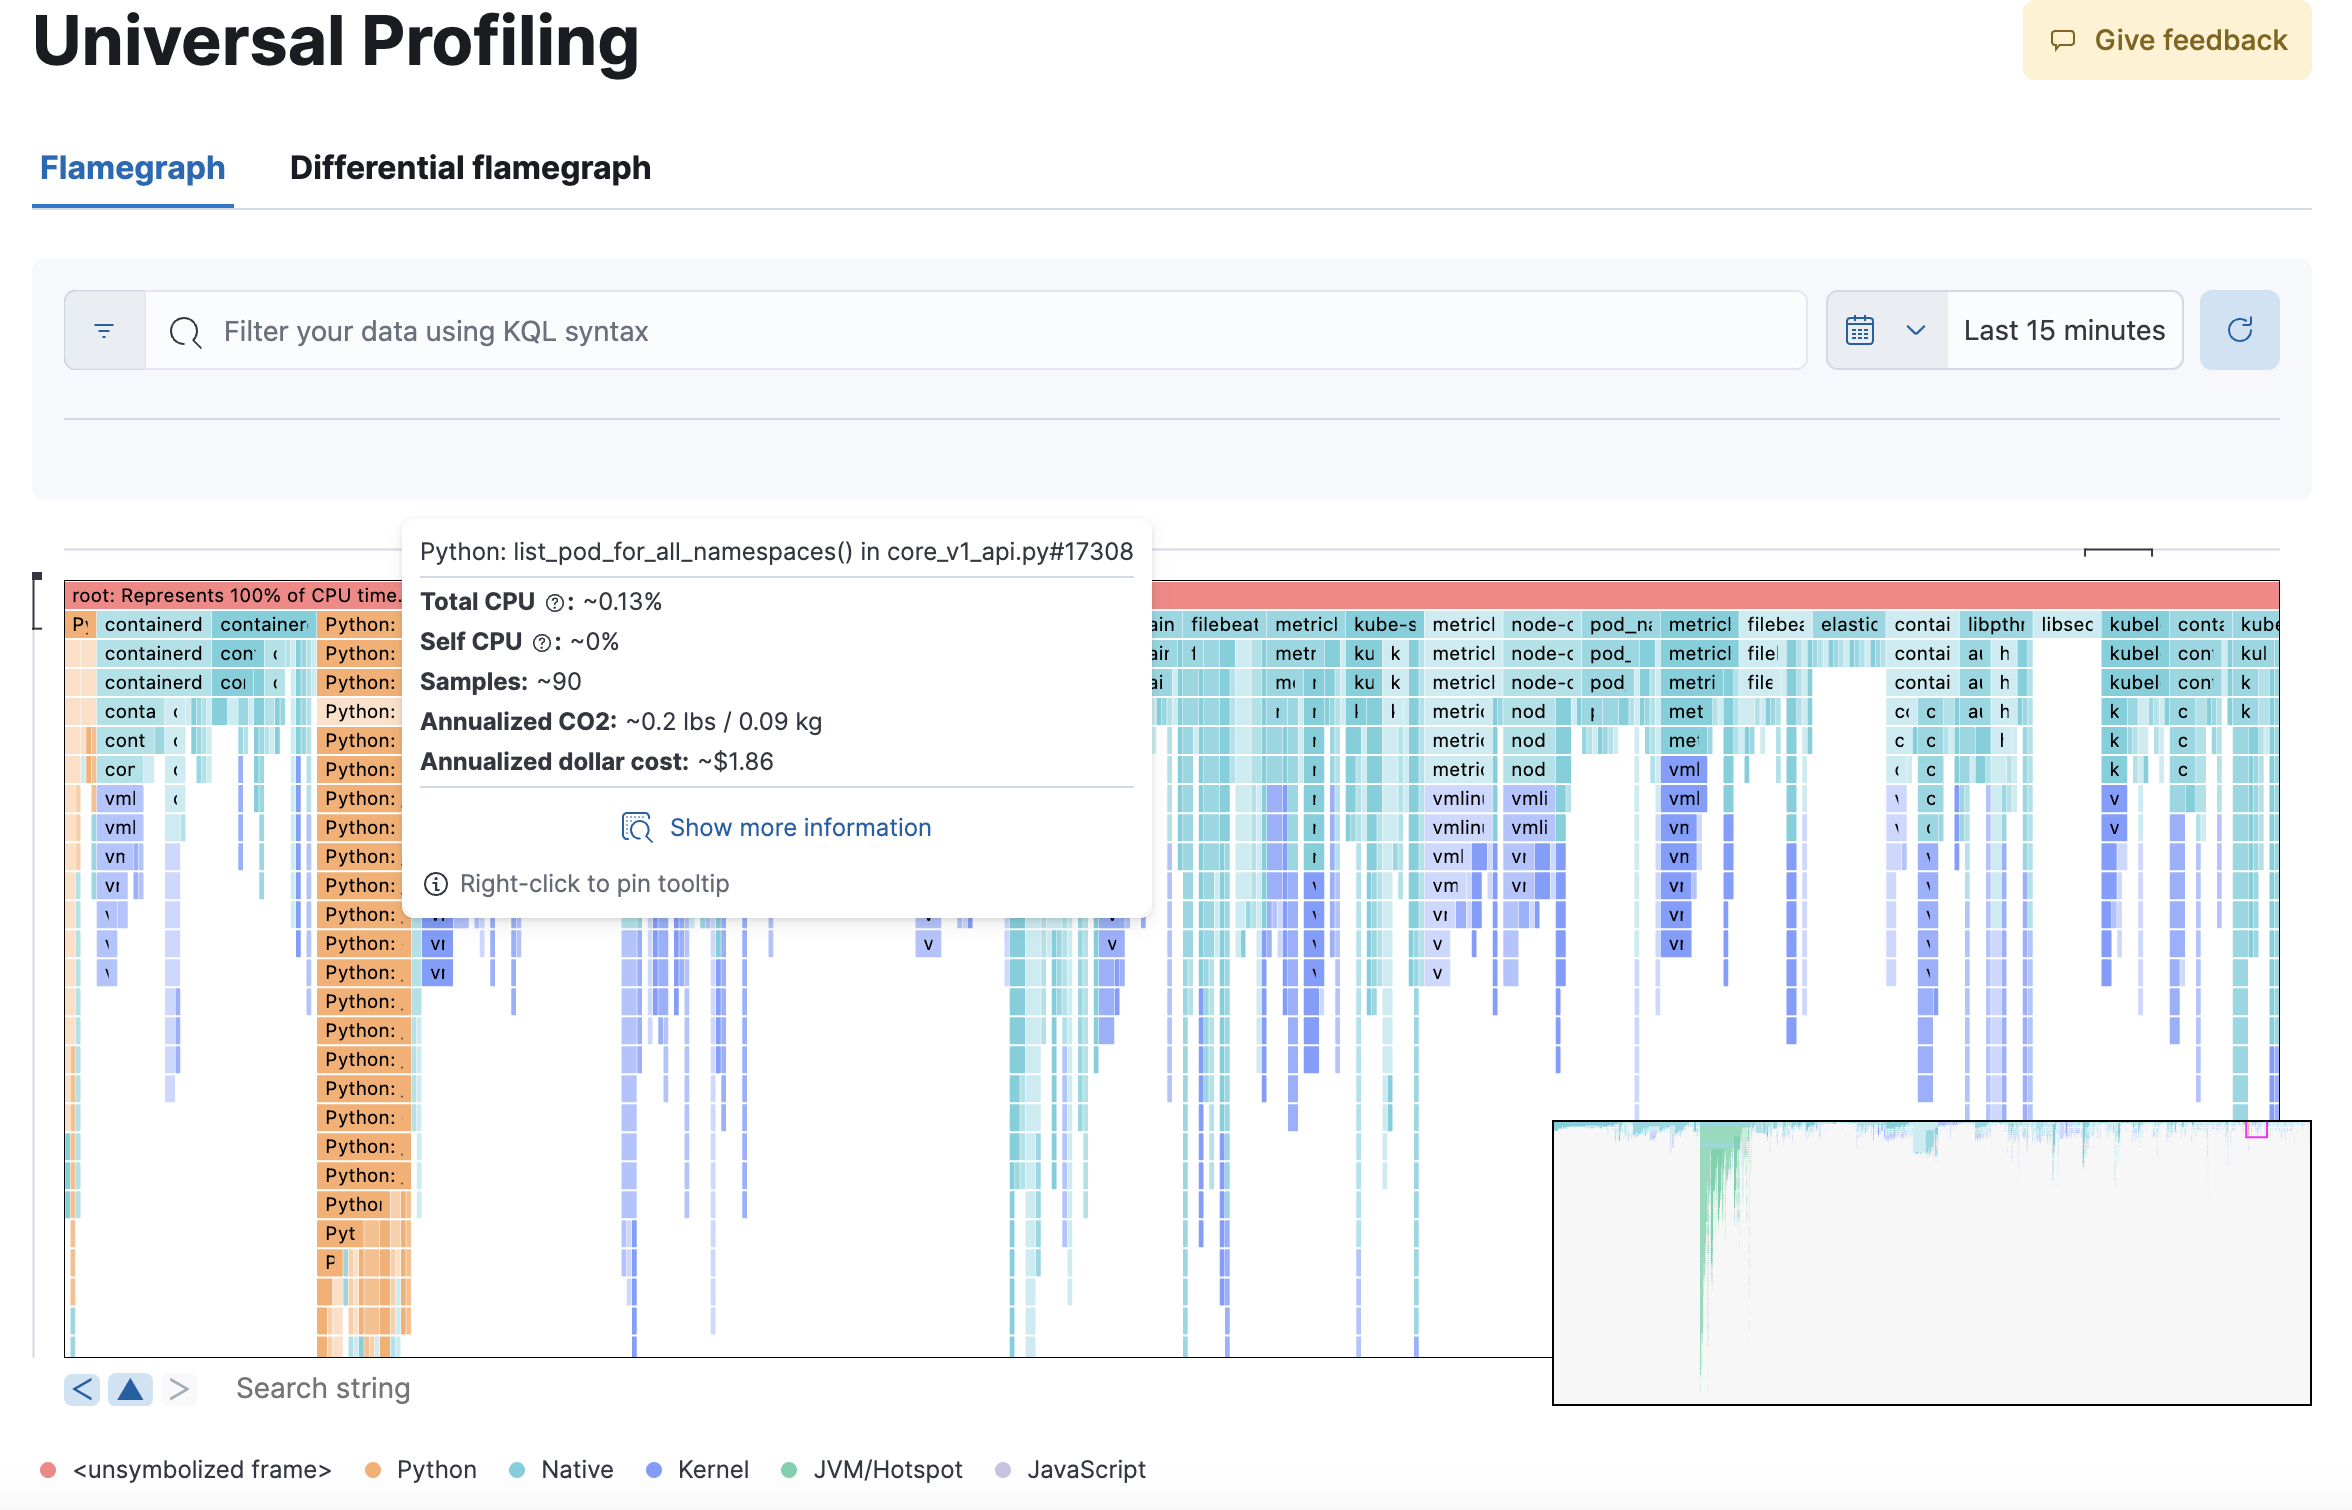 profiling flamegraph view